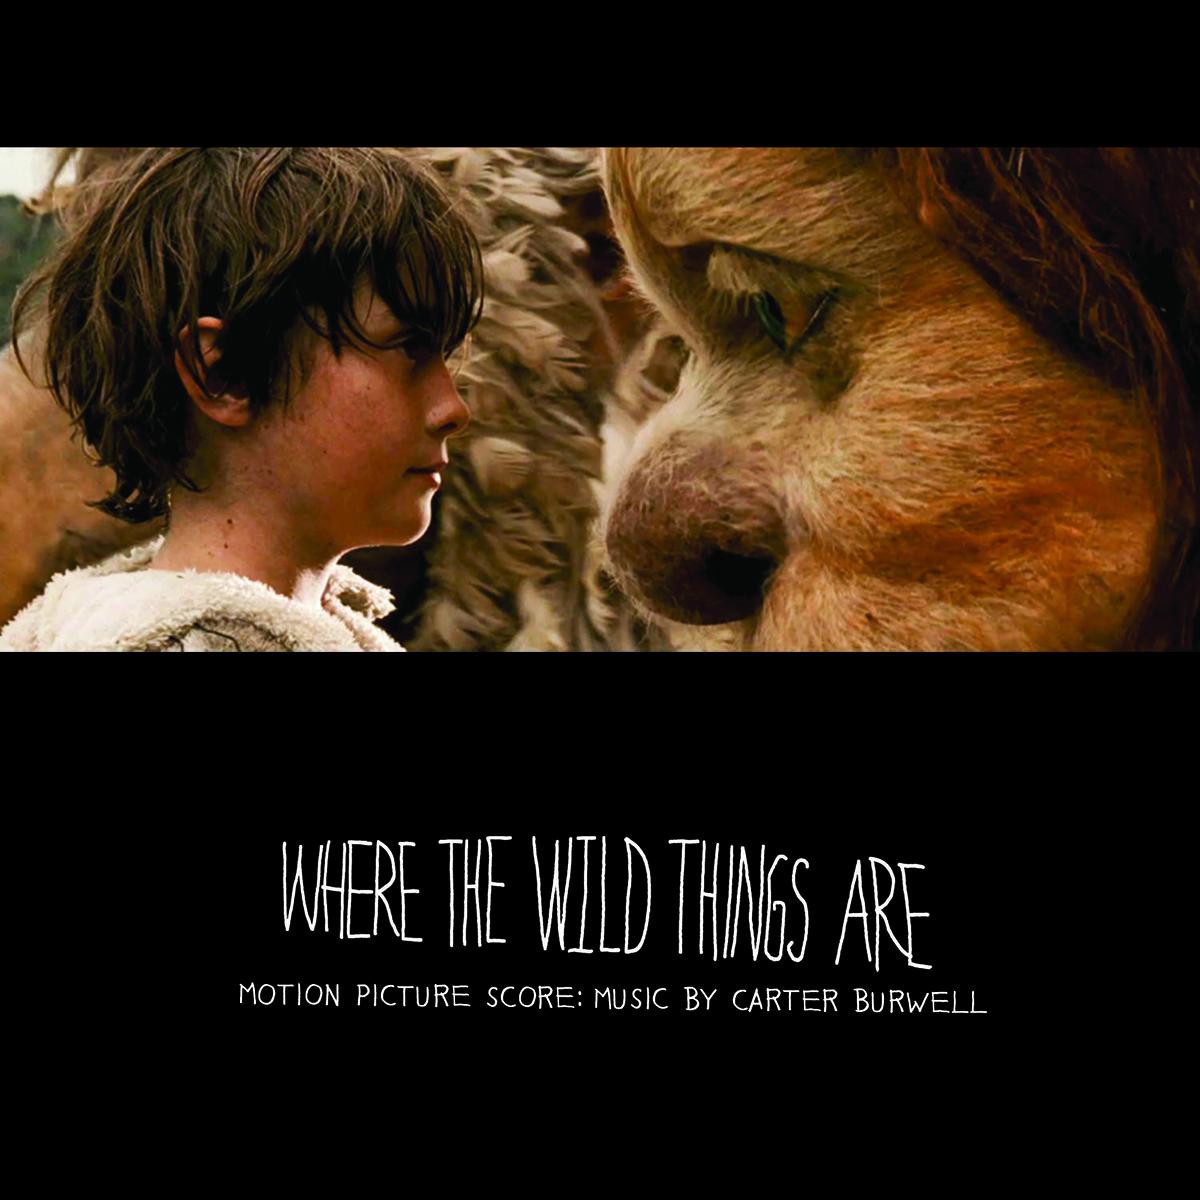 Where the Wild Things Are (Motion Picture Score)